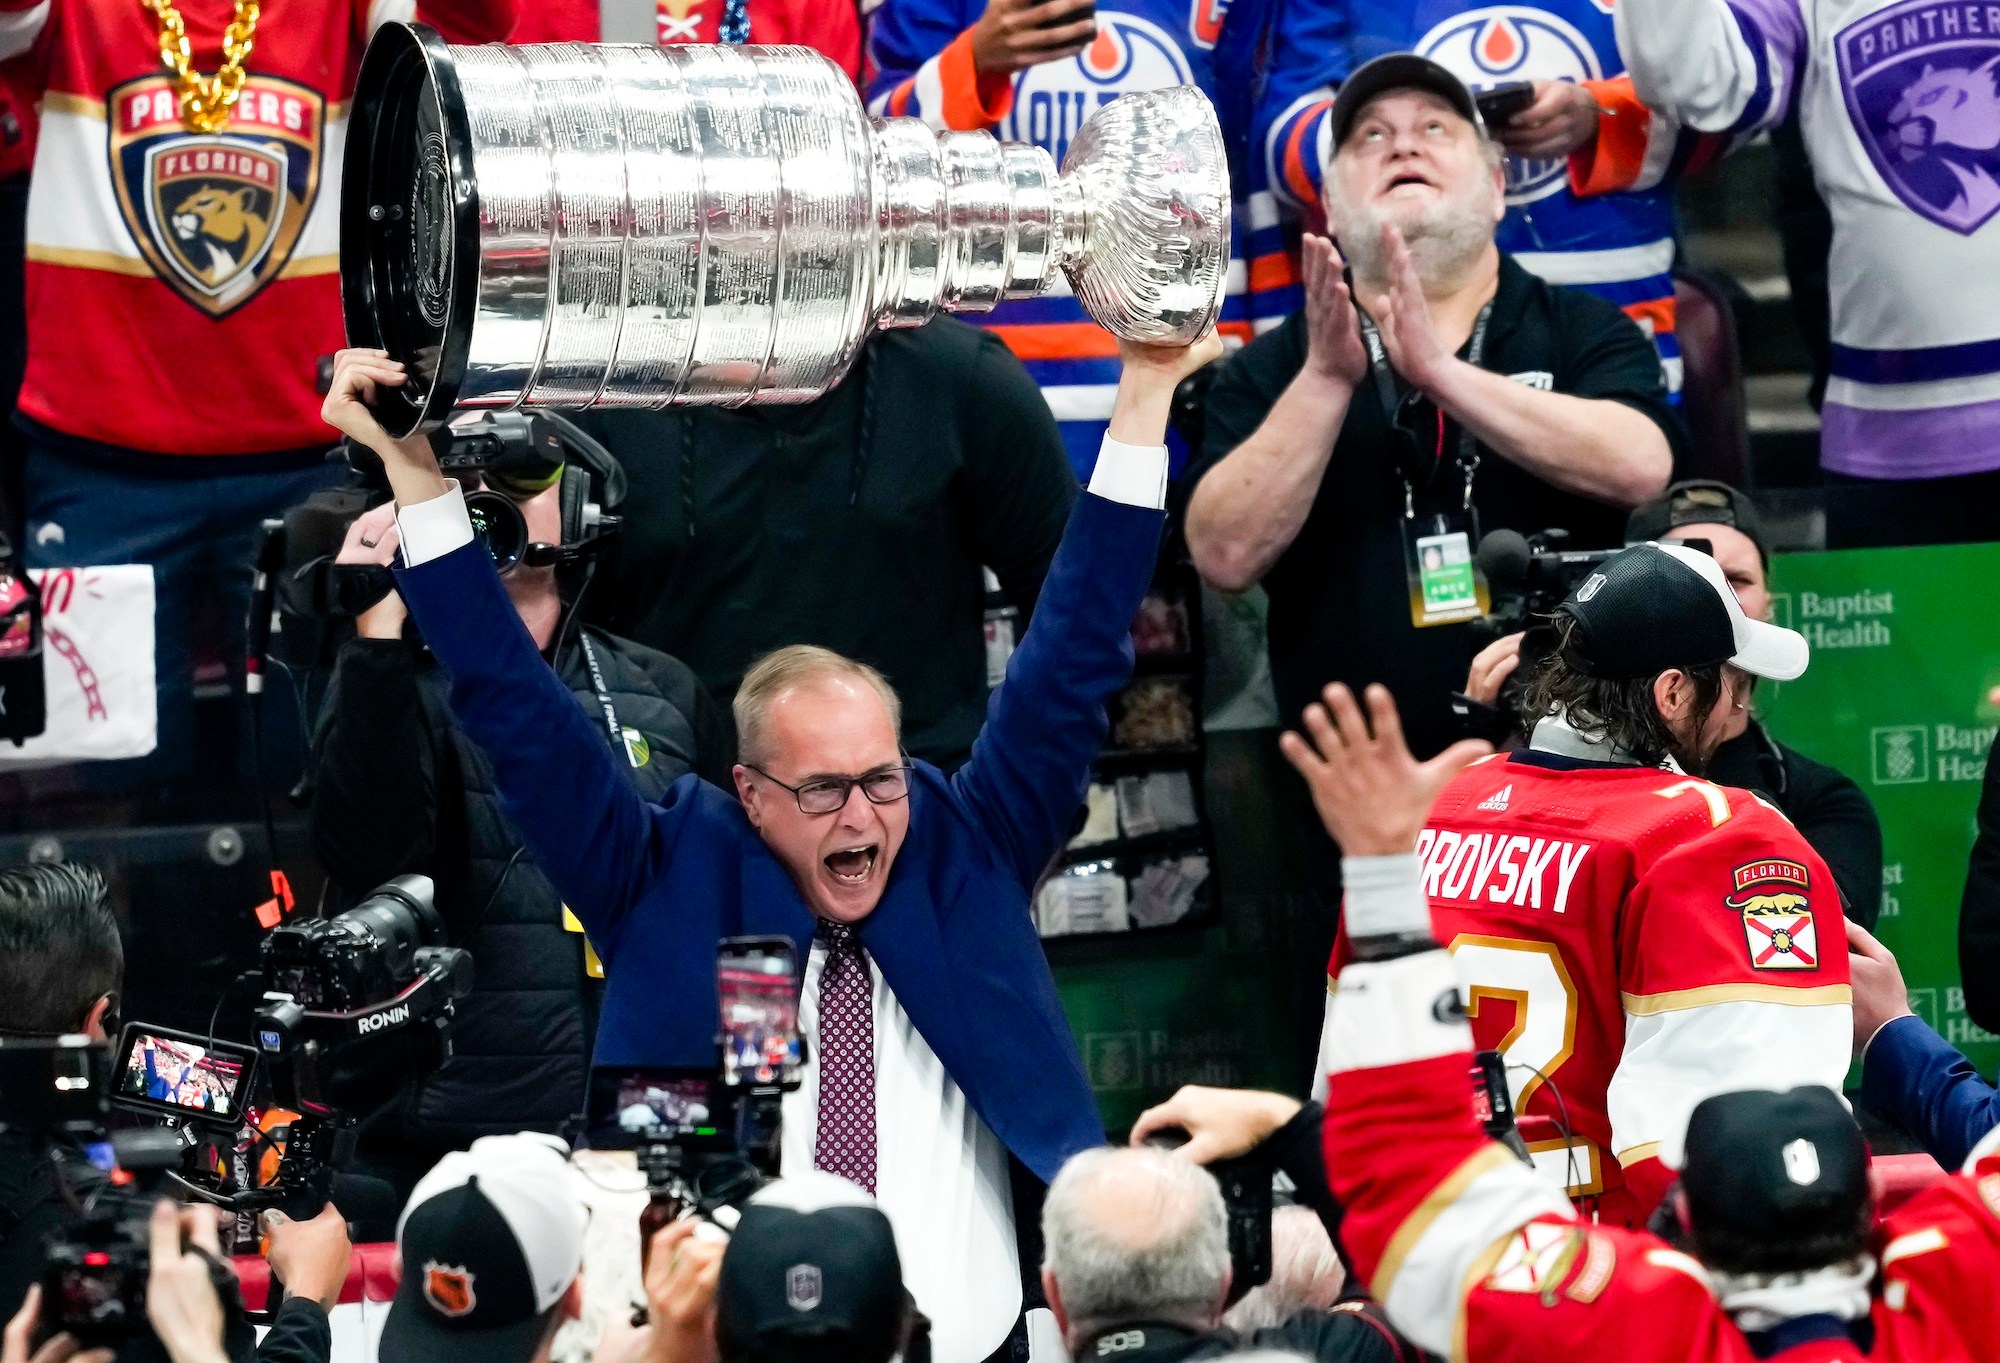 SUNRISE, FL - JUNE 24: Florida Panthers head coach Paul Maurice raises the Stanley Cup during the NHL Stanley Cup Finals, Game 7 between the Florida Panthers and Edmonton Oilers on June 24th, 2024 at Amerant Bank Arena in Sunrise, FL. (Photo by Andrew Bershaw/Icon Sportswire via Getty Images)